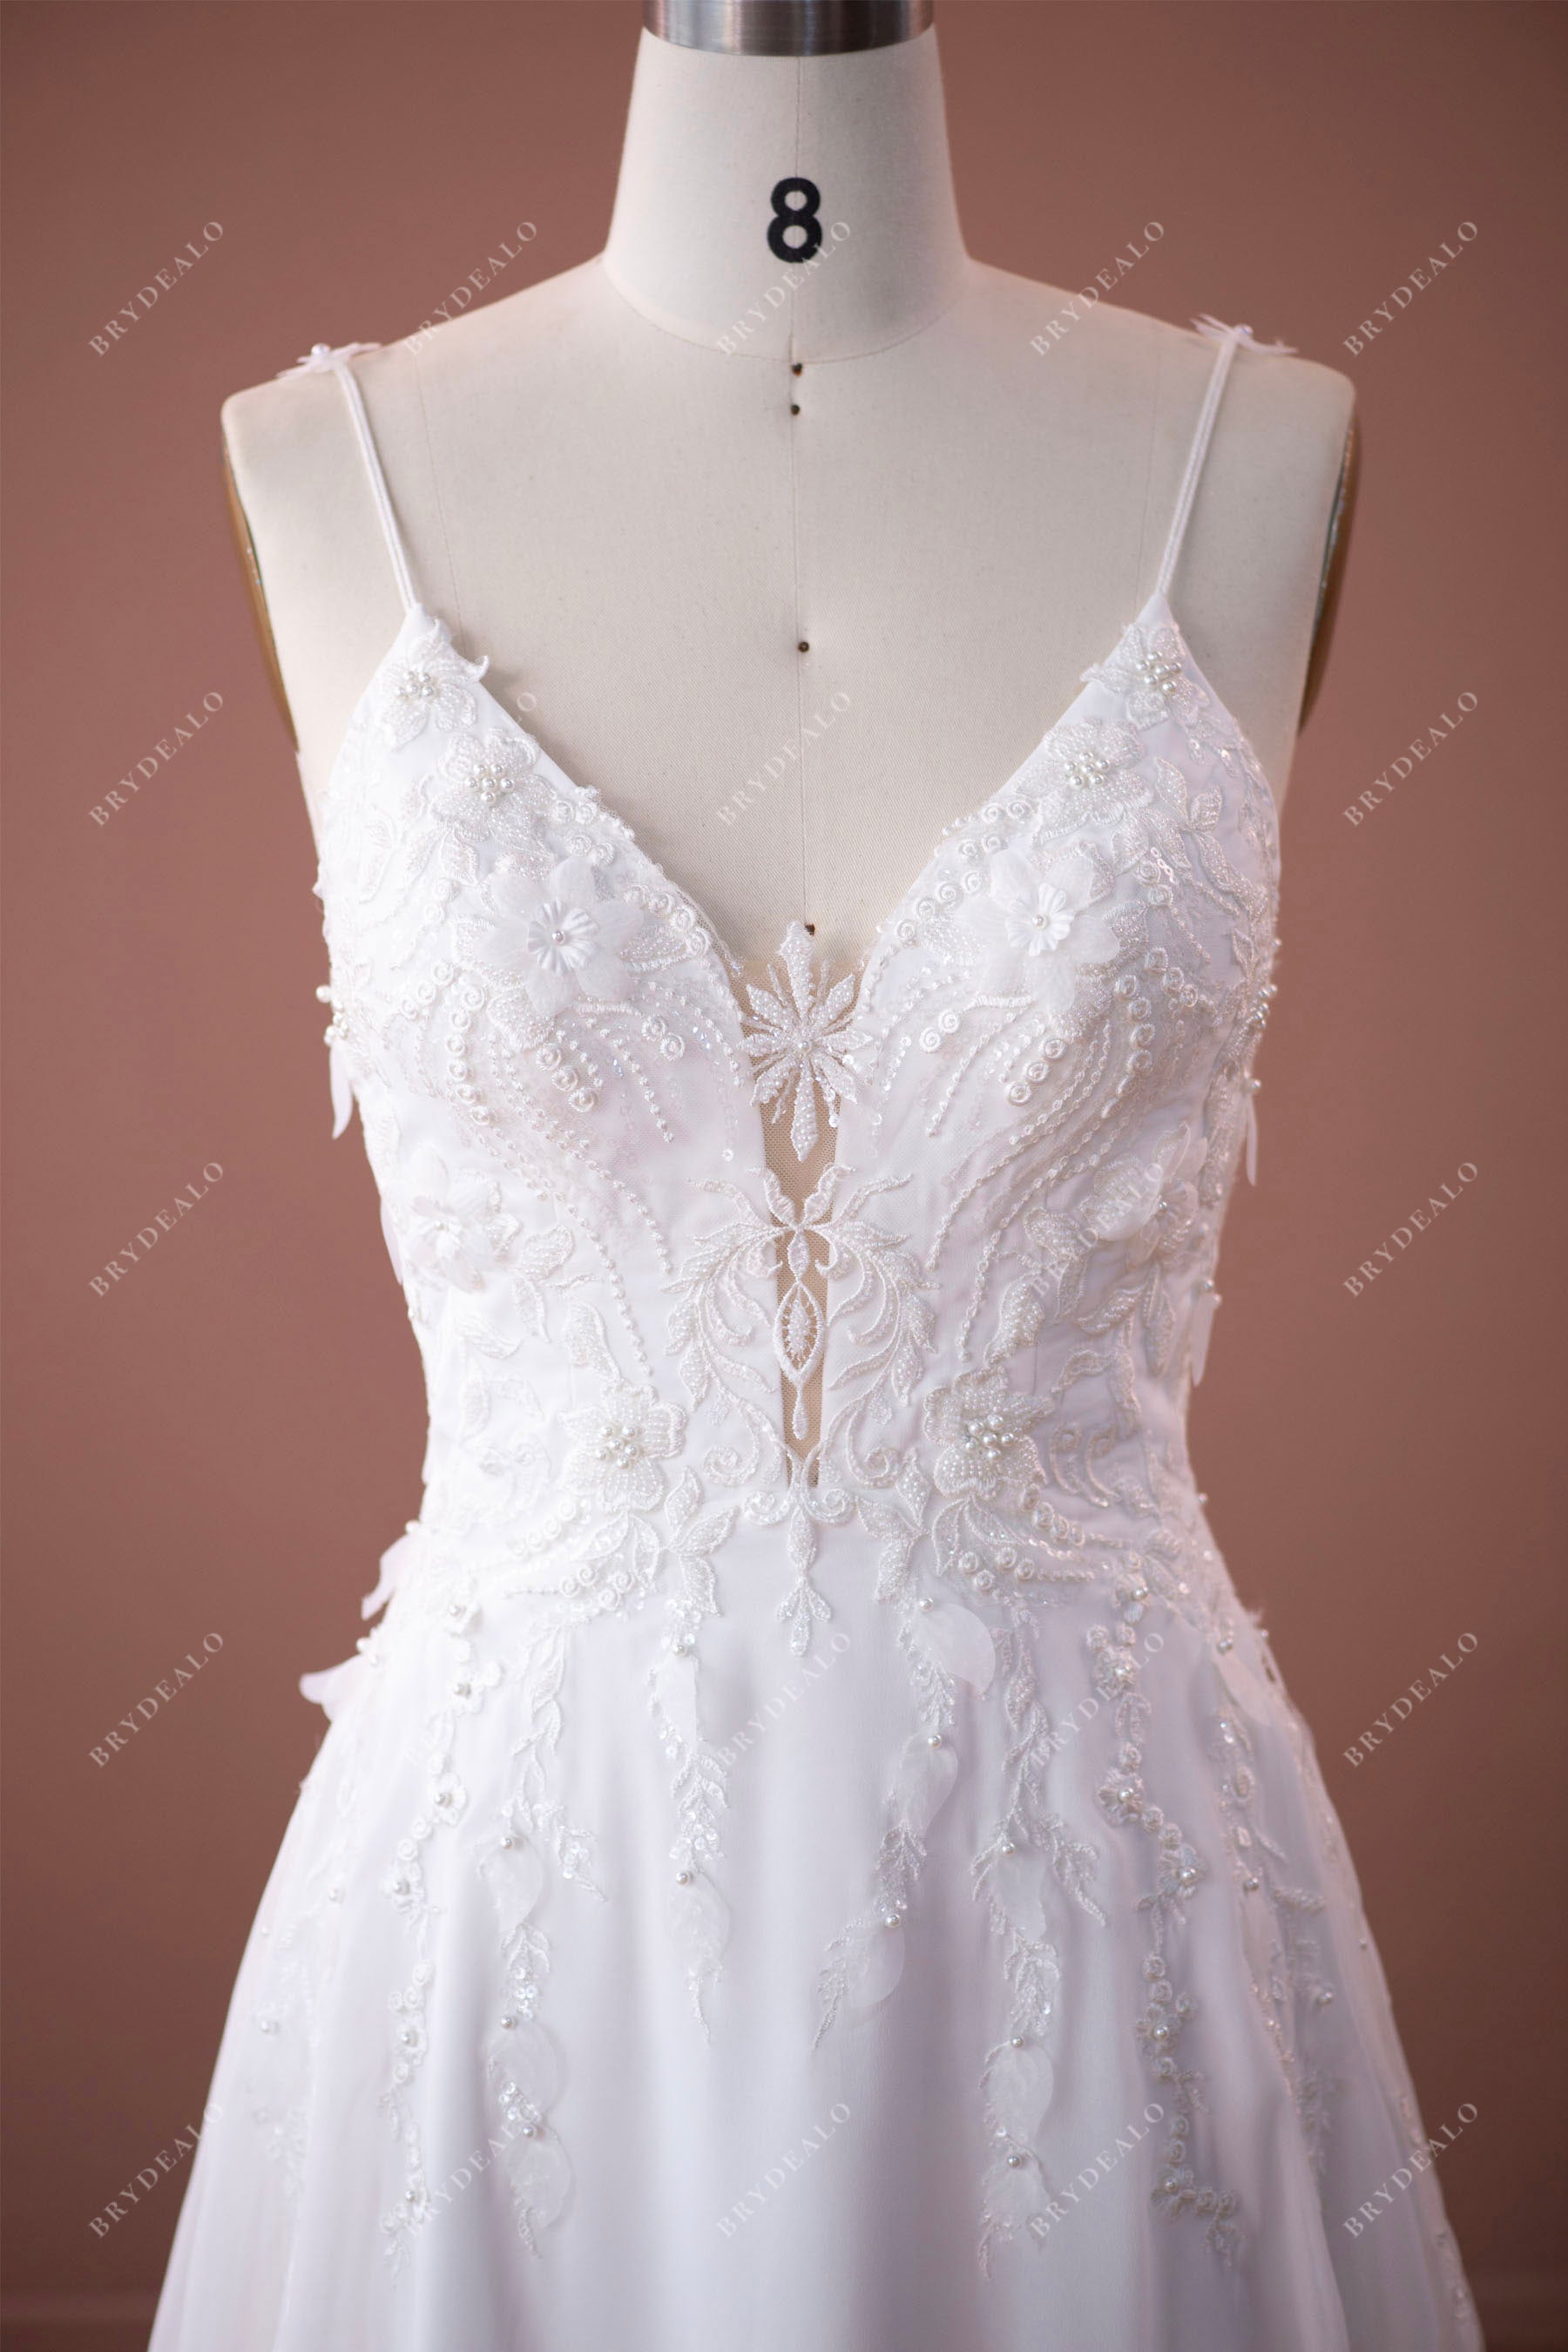 spaghetti straps plunging flower lace appliqued sleeveless wedding dress